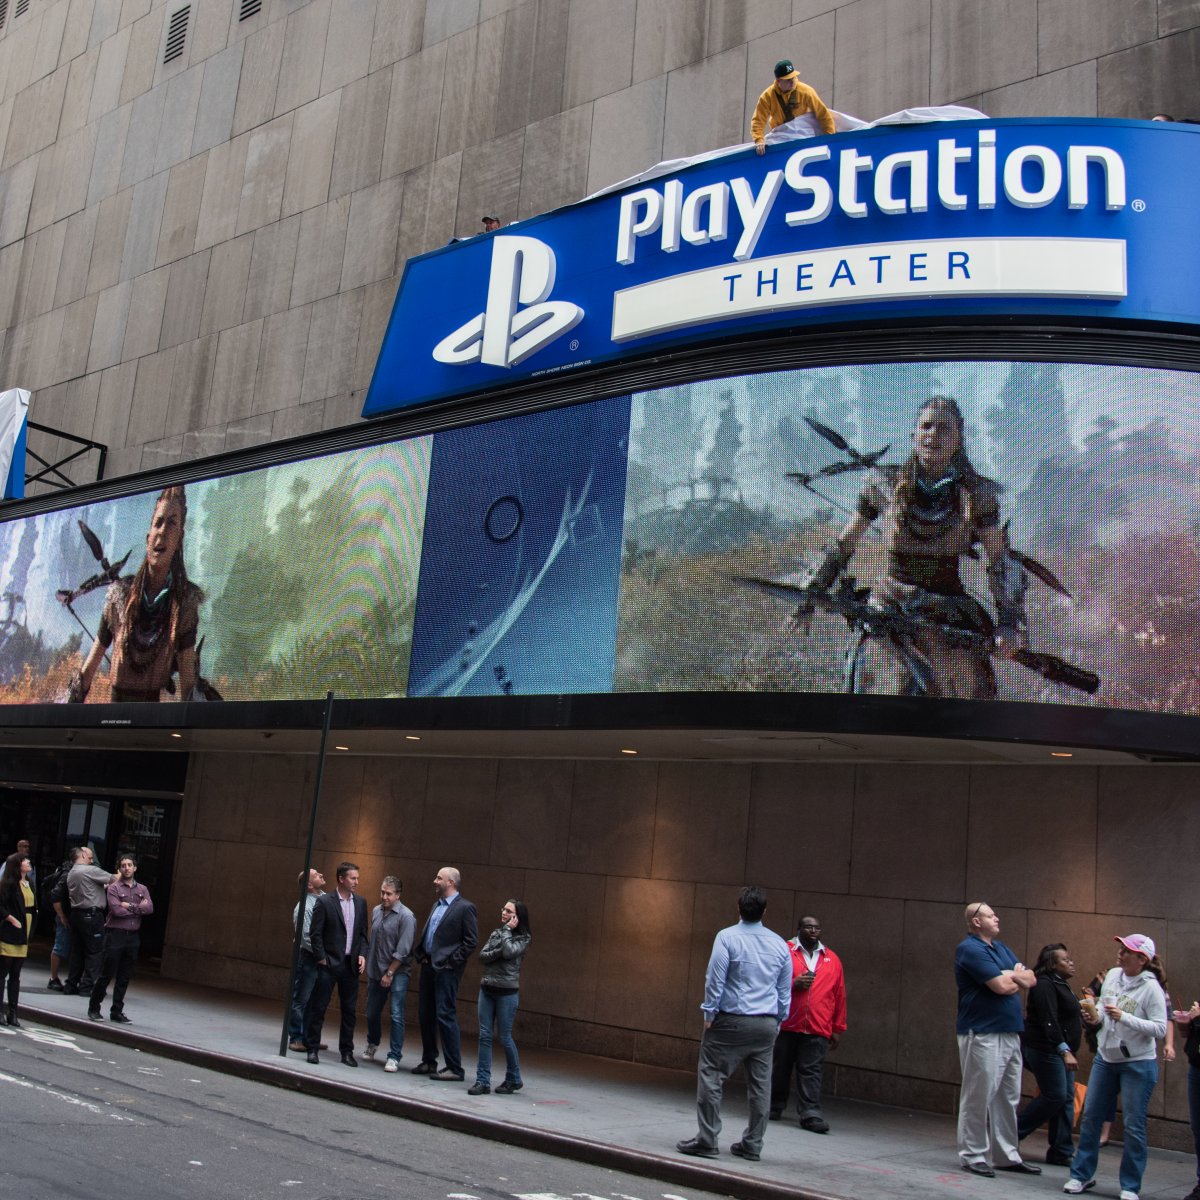 Exterior image of Playstation Theatre from the street during the day